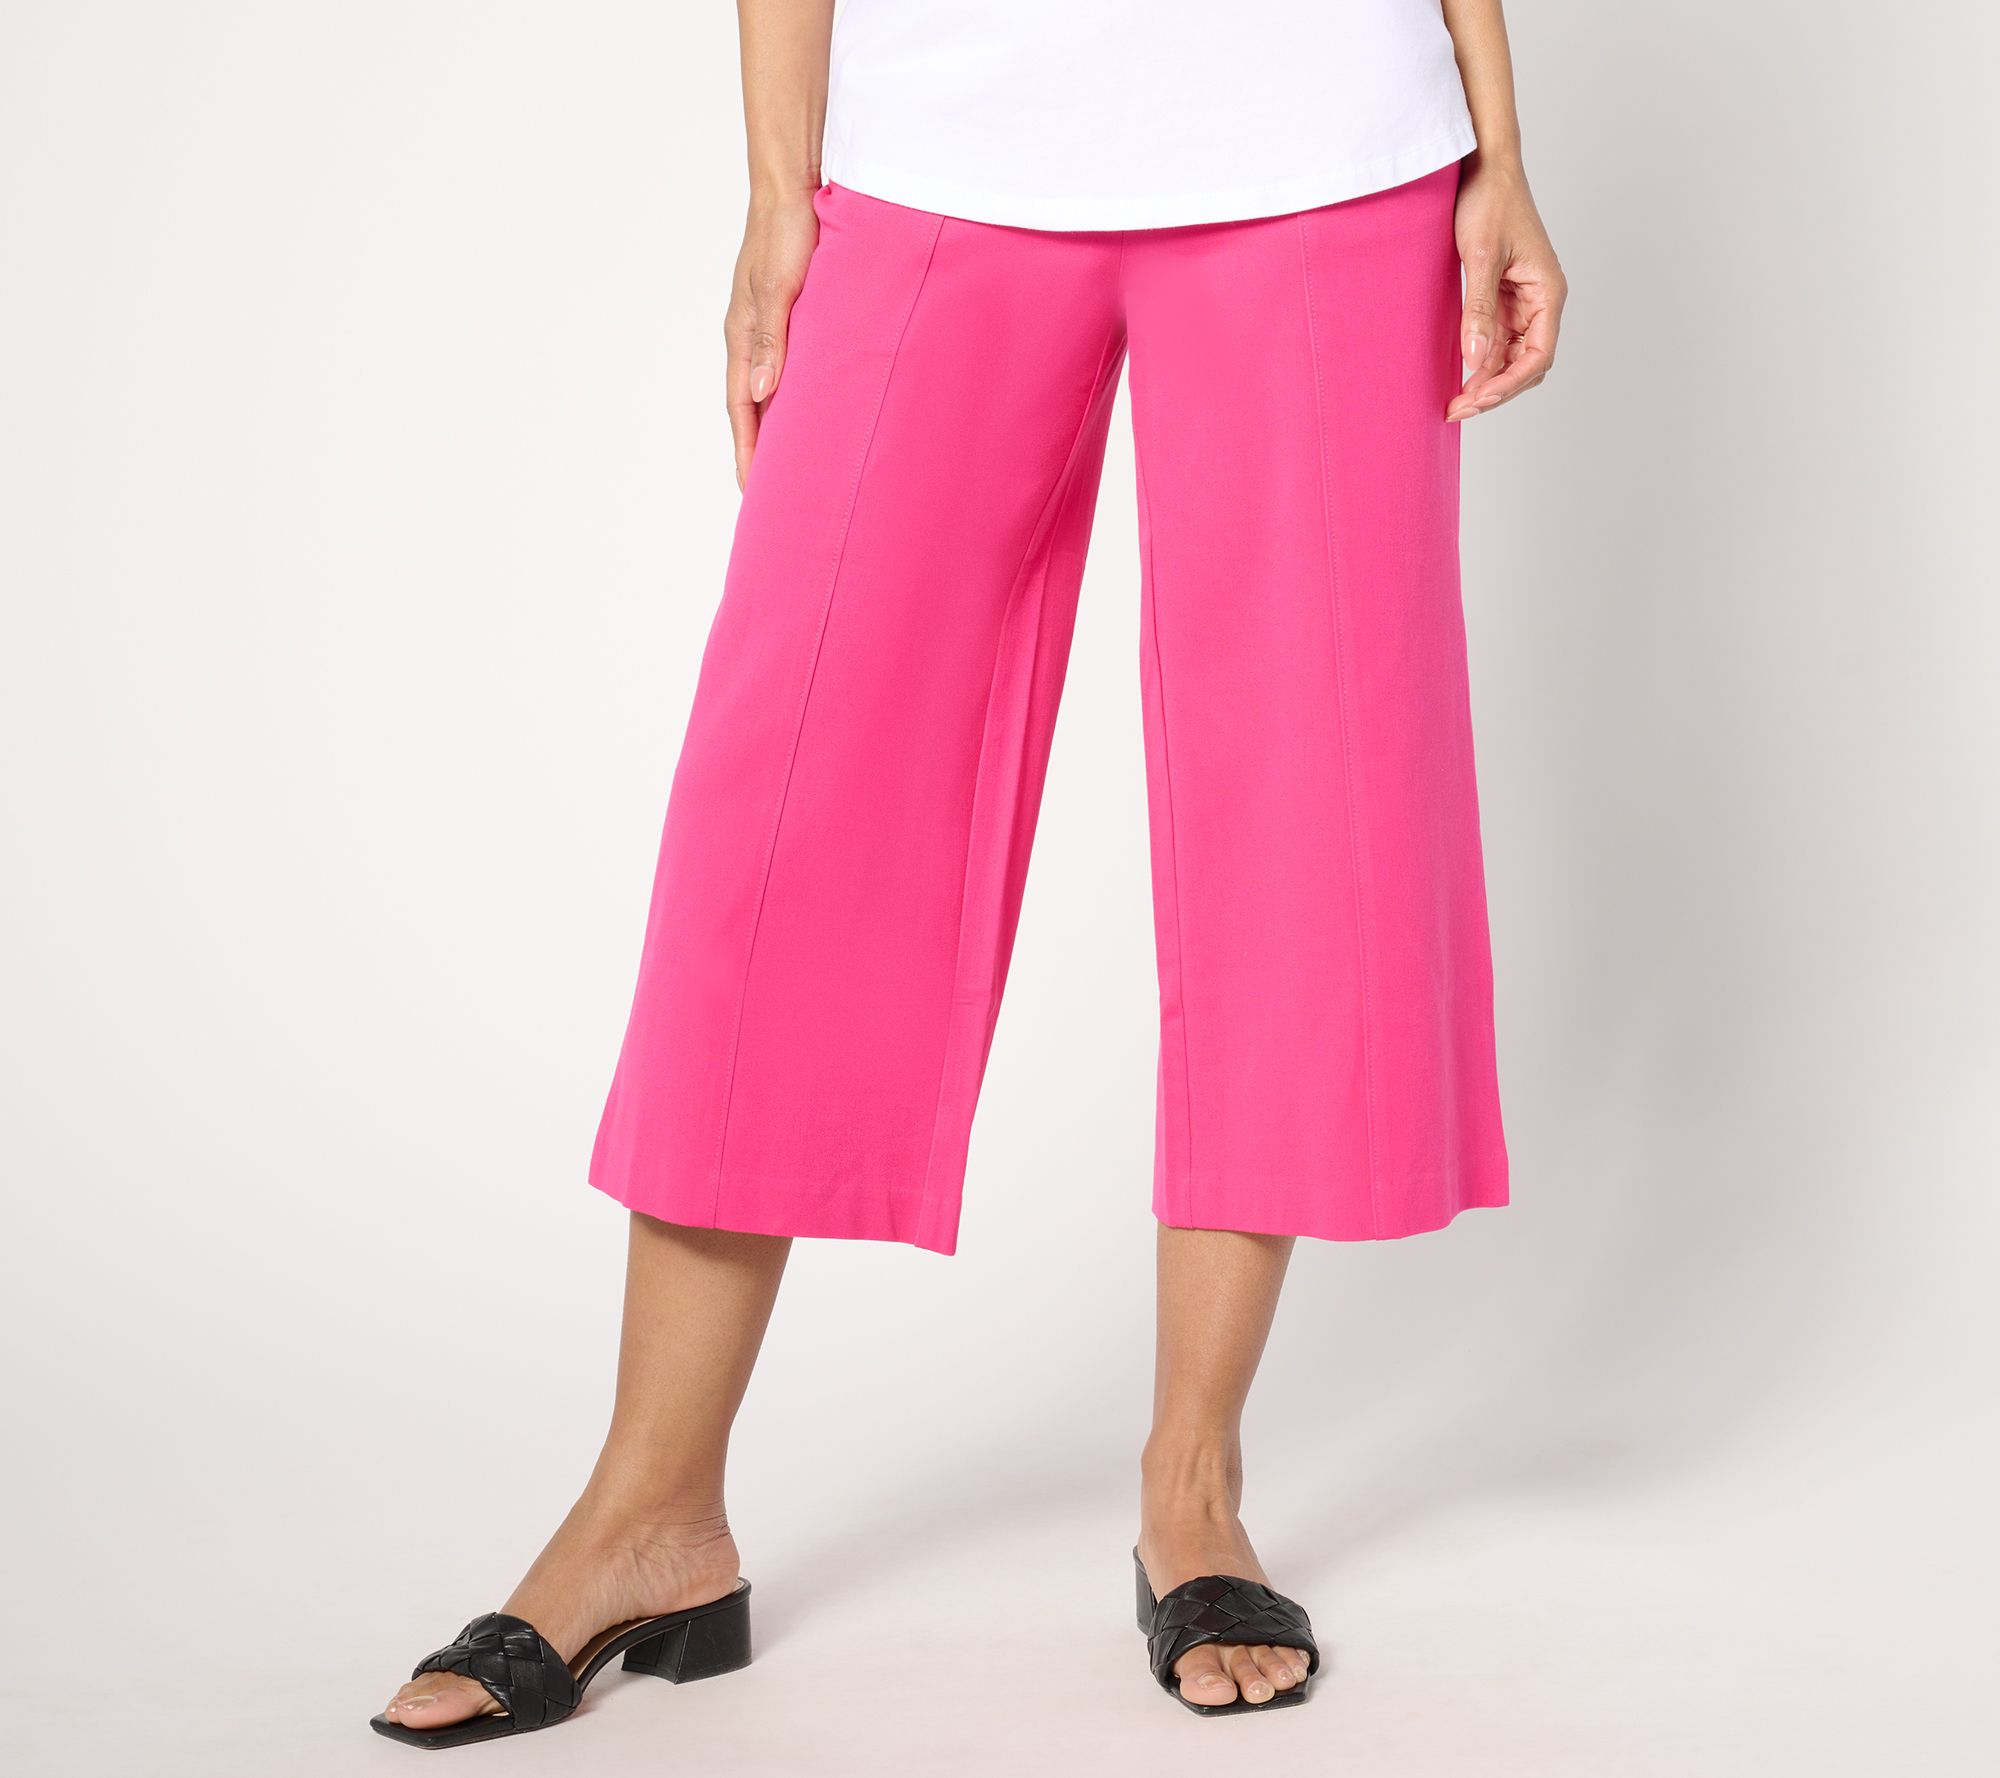 ISaac Mizrahi Live! Petite 24/7 Stretch Culottes with Seam Detail